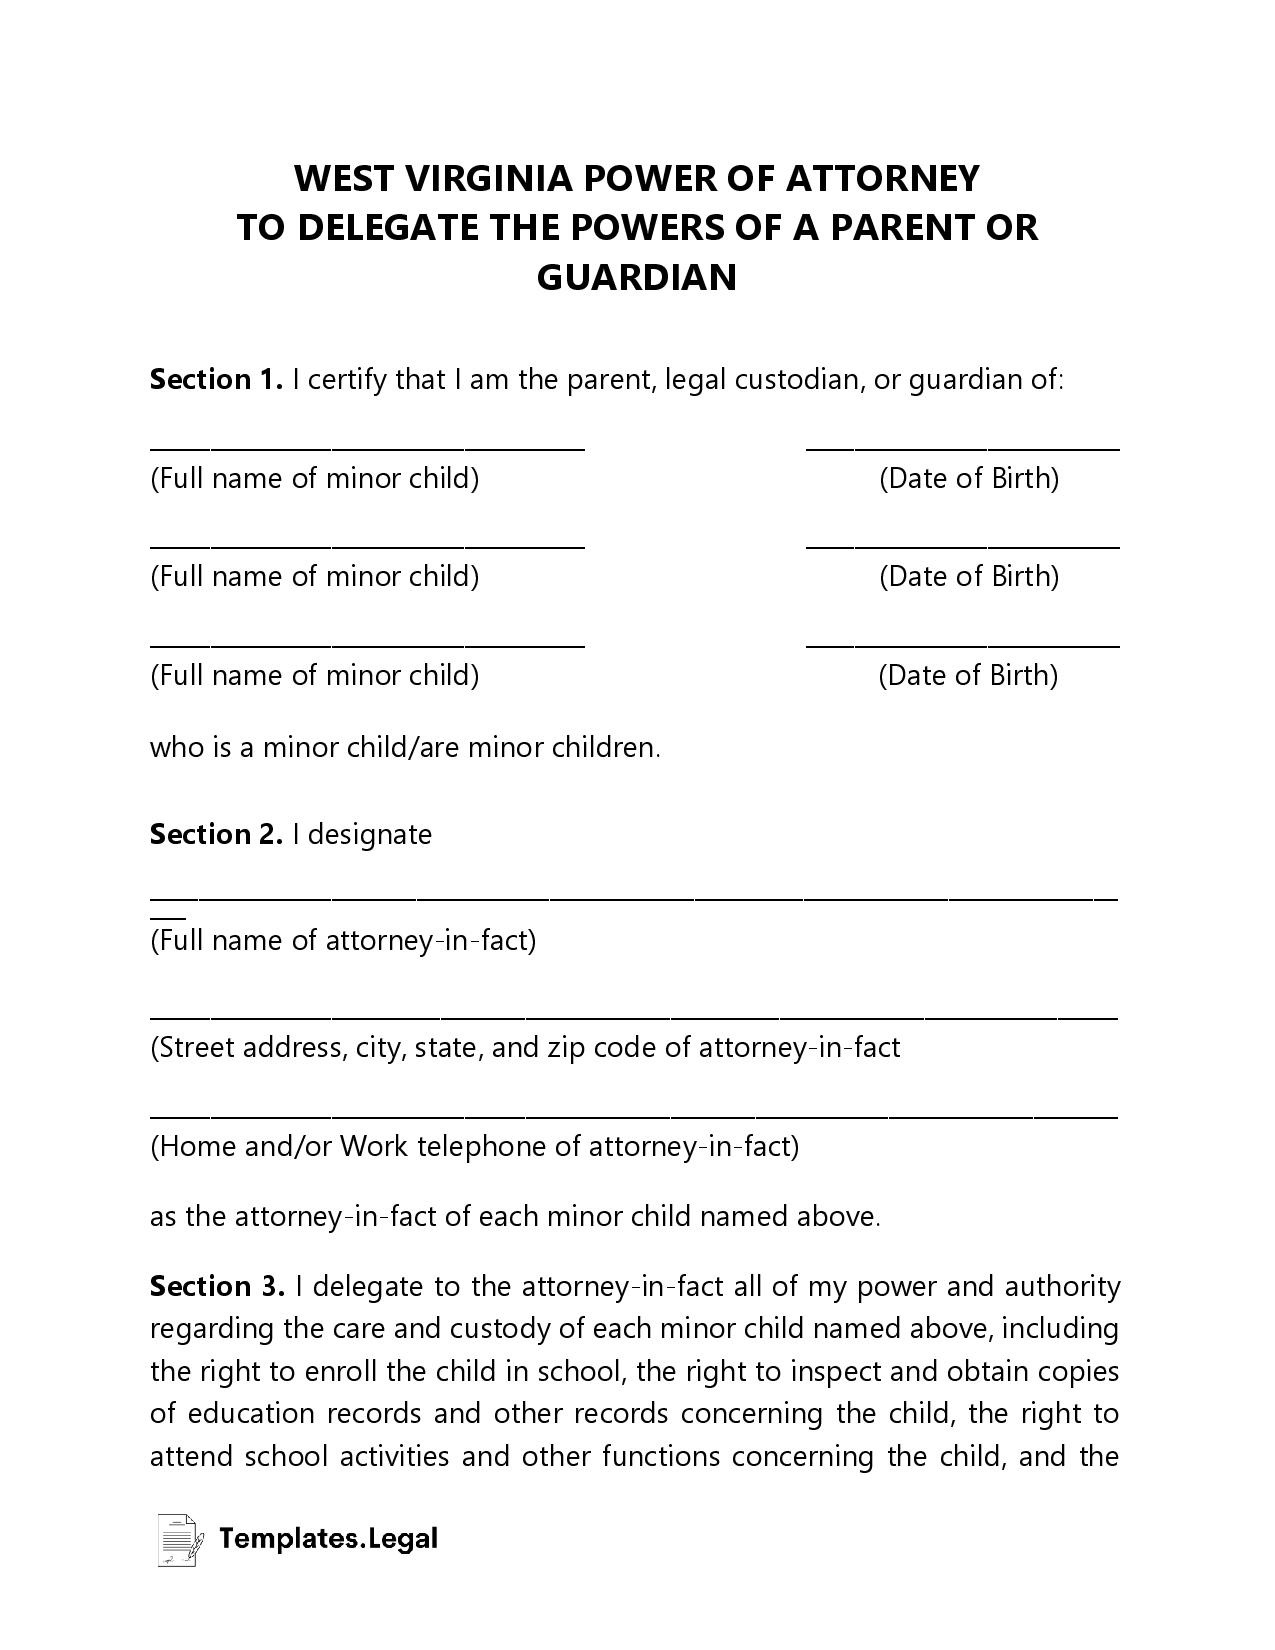 West Virginia Minor (Child) Power of Attorney - Templates.Legal